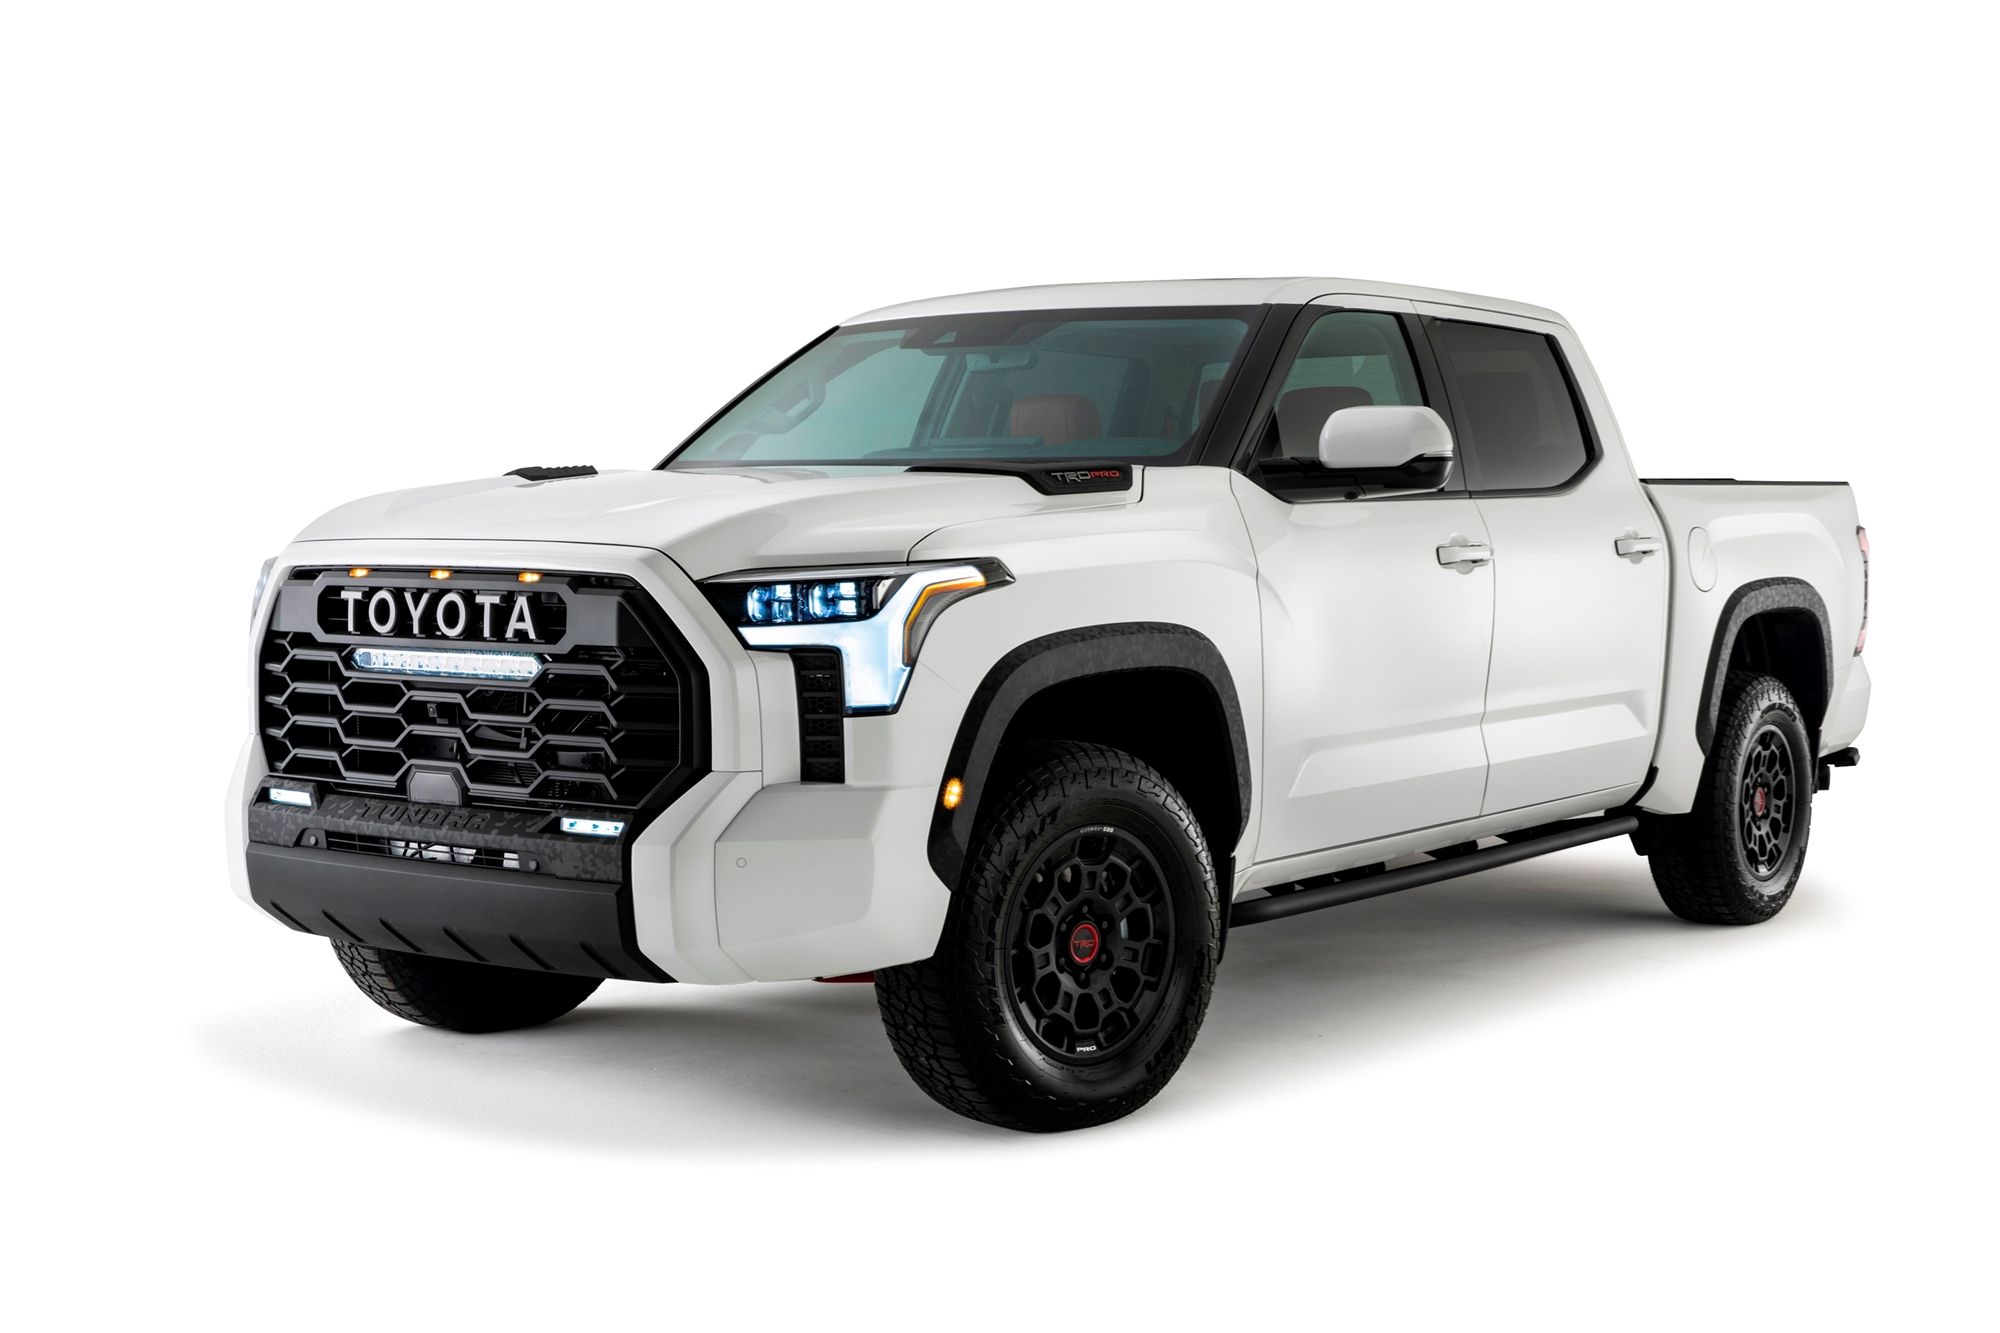 2022 Toyota Tundra 1794 Edition Full Specs, Features and Price CarBuzz